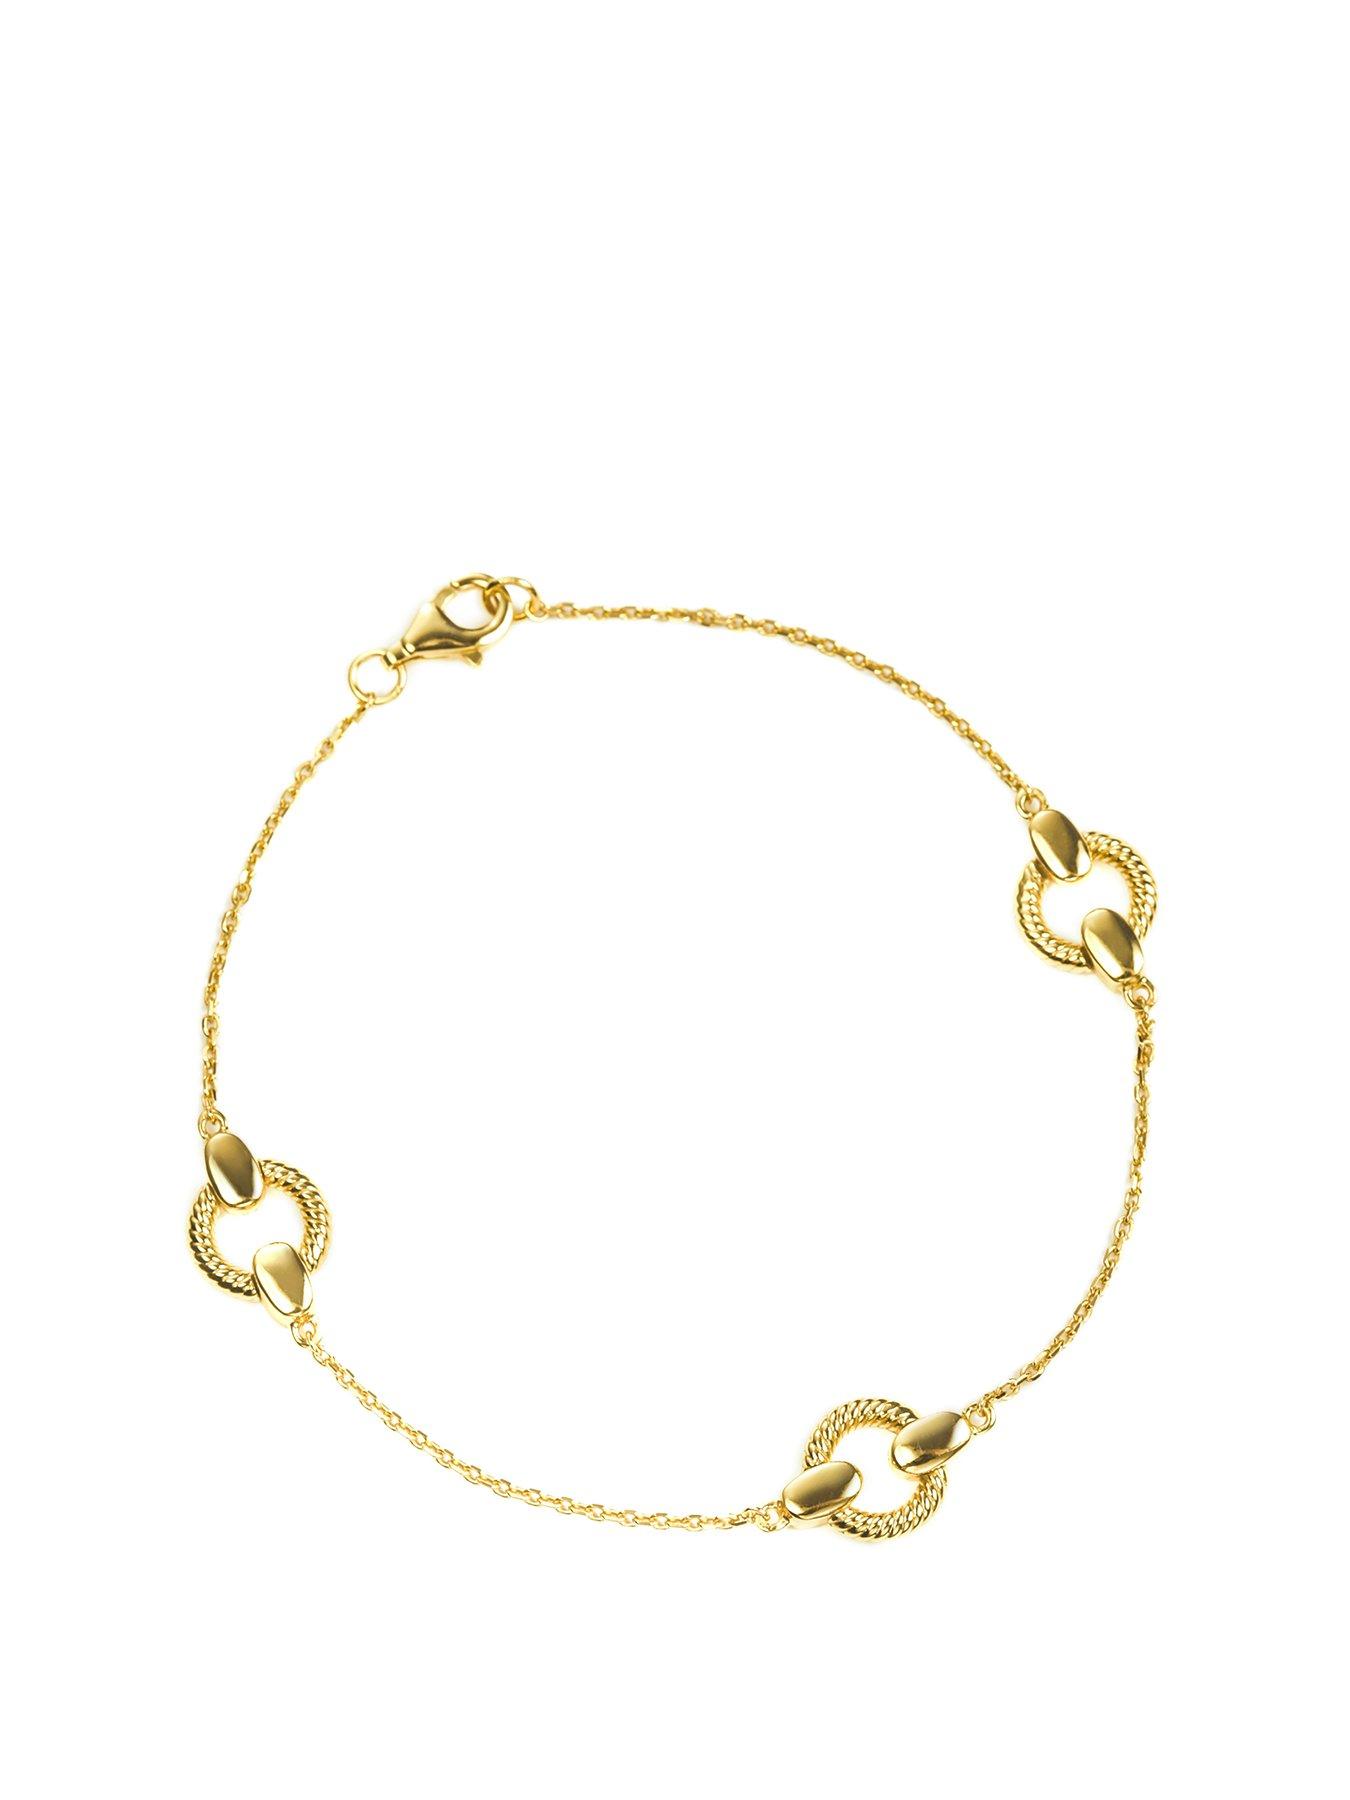 LOVELY GIFT IDEA YELLOW GOLD PLATED HEART FLOWER CHARM 18CM BRACELET 7 INCHES 